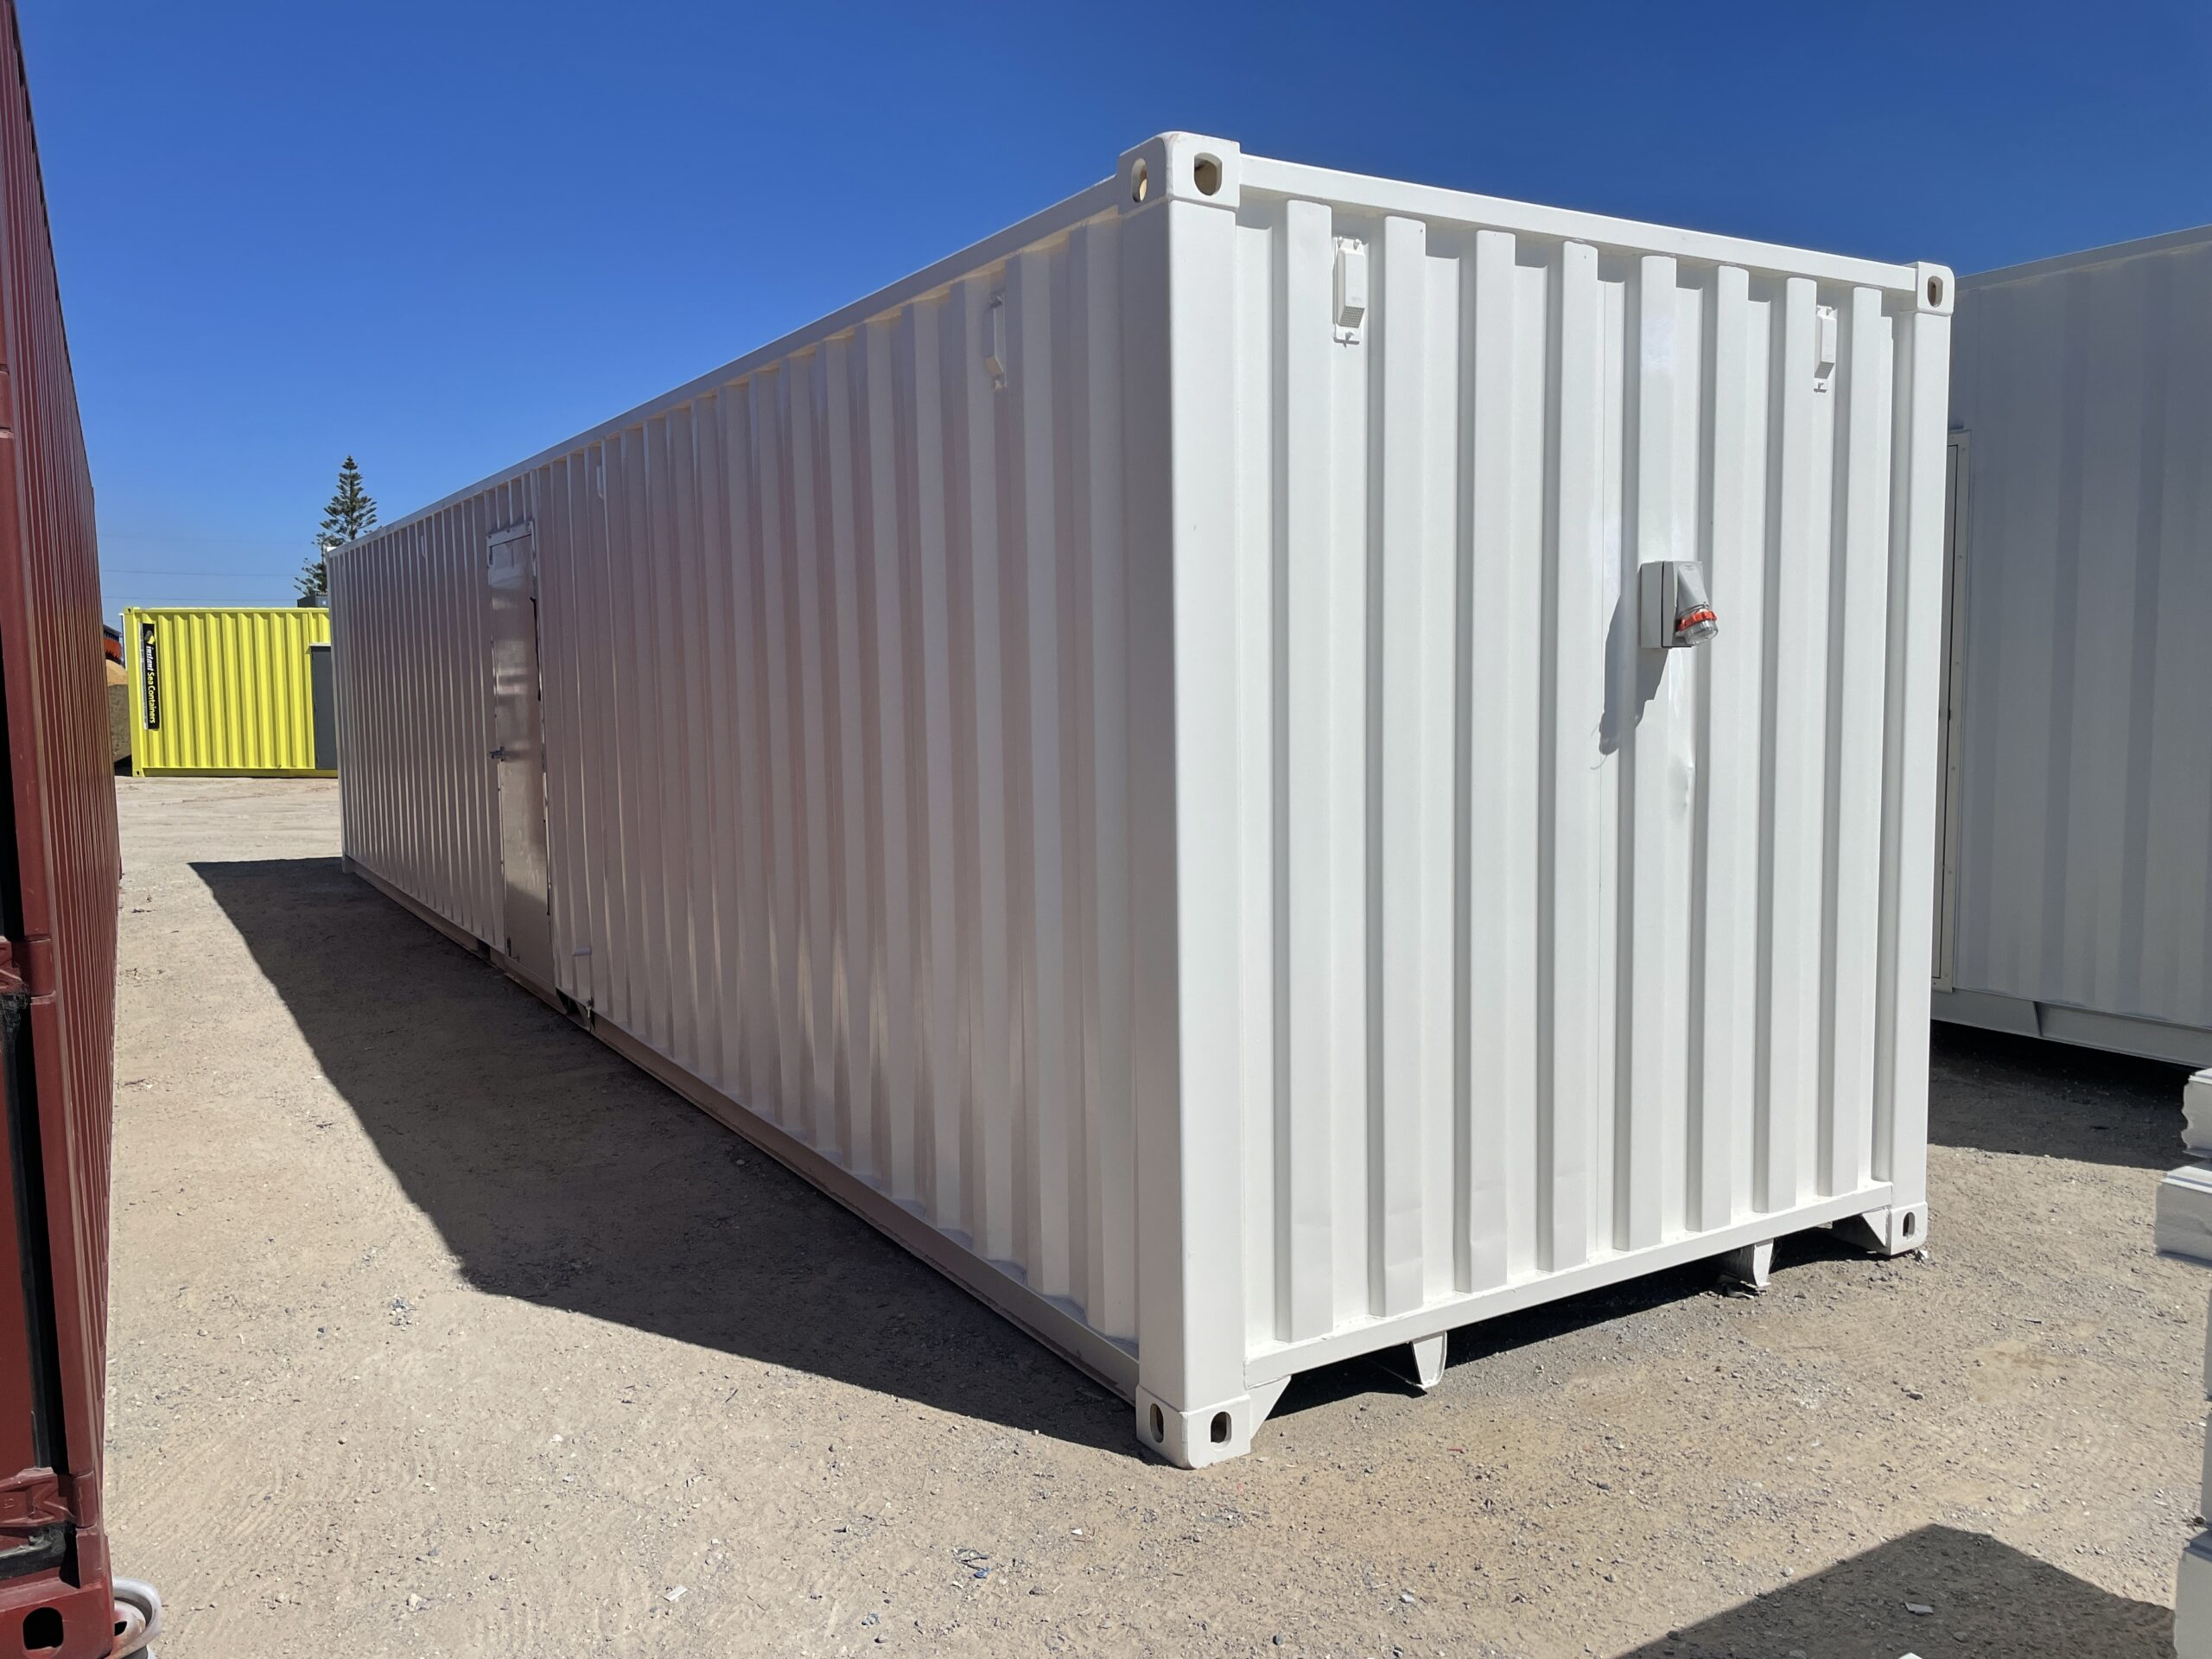 White shipping container on a gravel lot with a blue sky in the background.